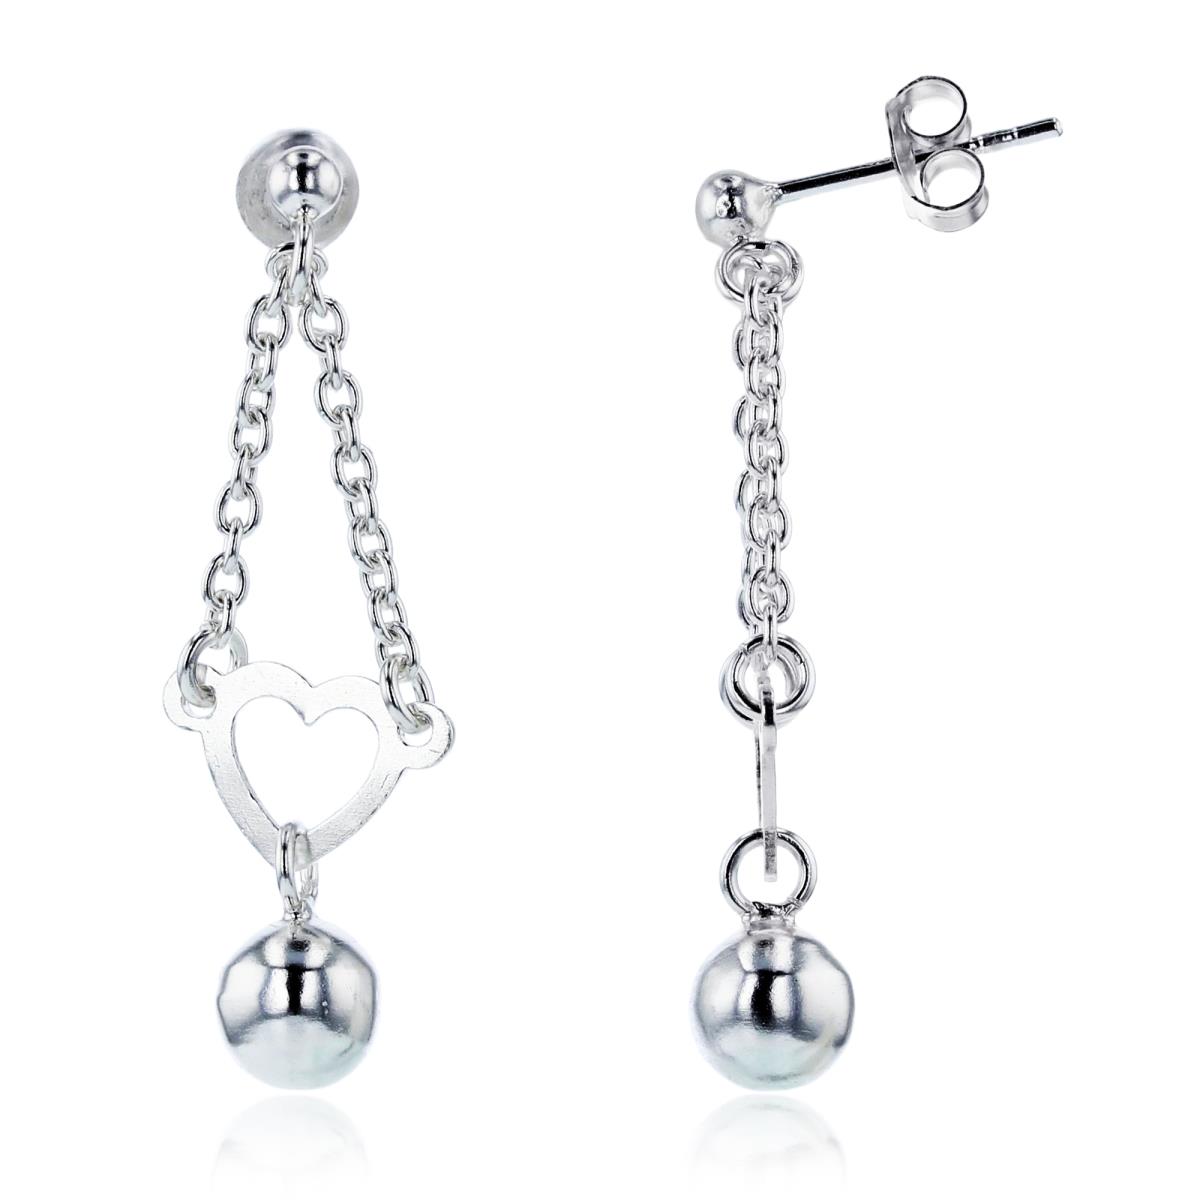 Sterling Silver Plated Open Heart with 6mm Ball Dangling on Chain Earrings